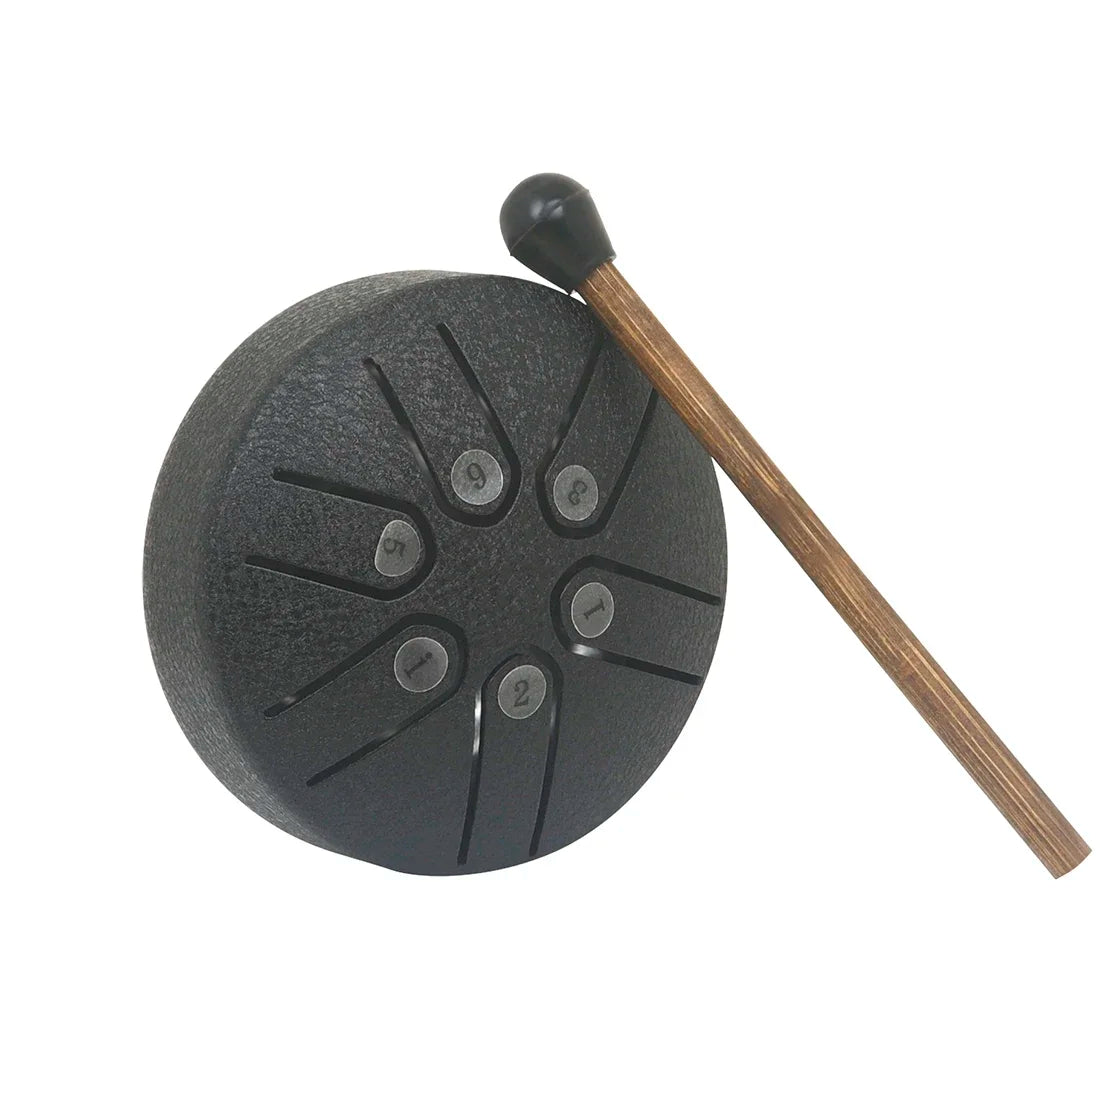 3 Inch 6-Tone Steel Tongue Hand Drum Mine Empty Drums With Drumsticks Beginners Percussion Musical Instruments Children's Gift